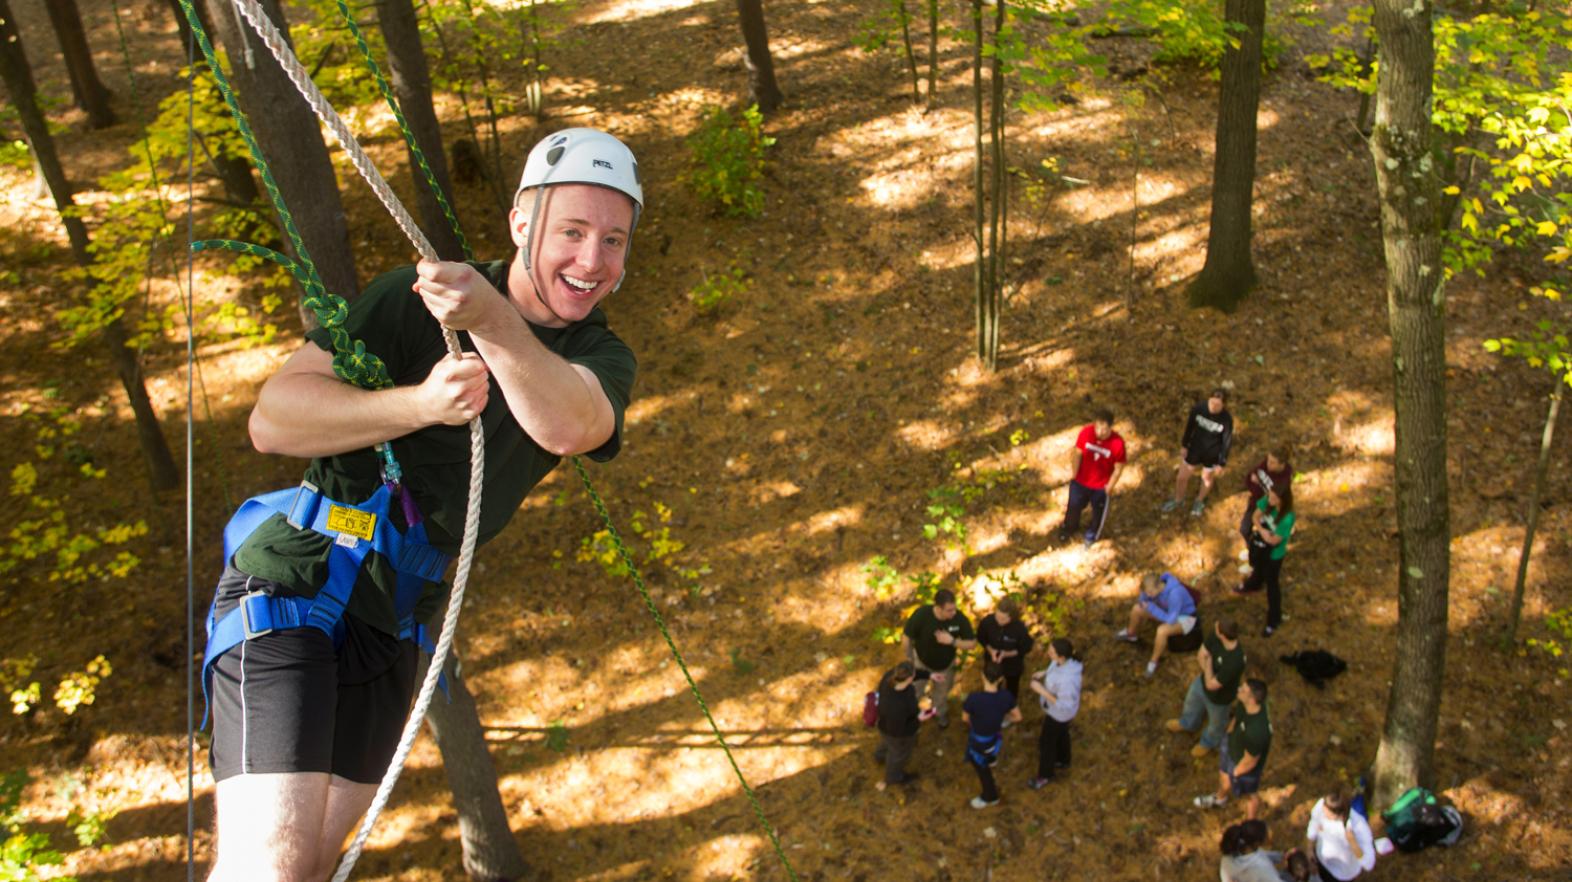 Students on the ropes course enjoy East Campus at Springfield College